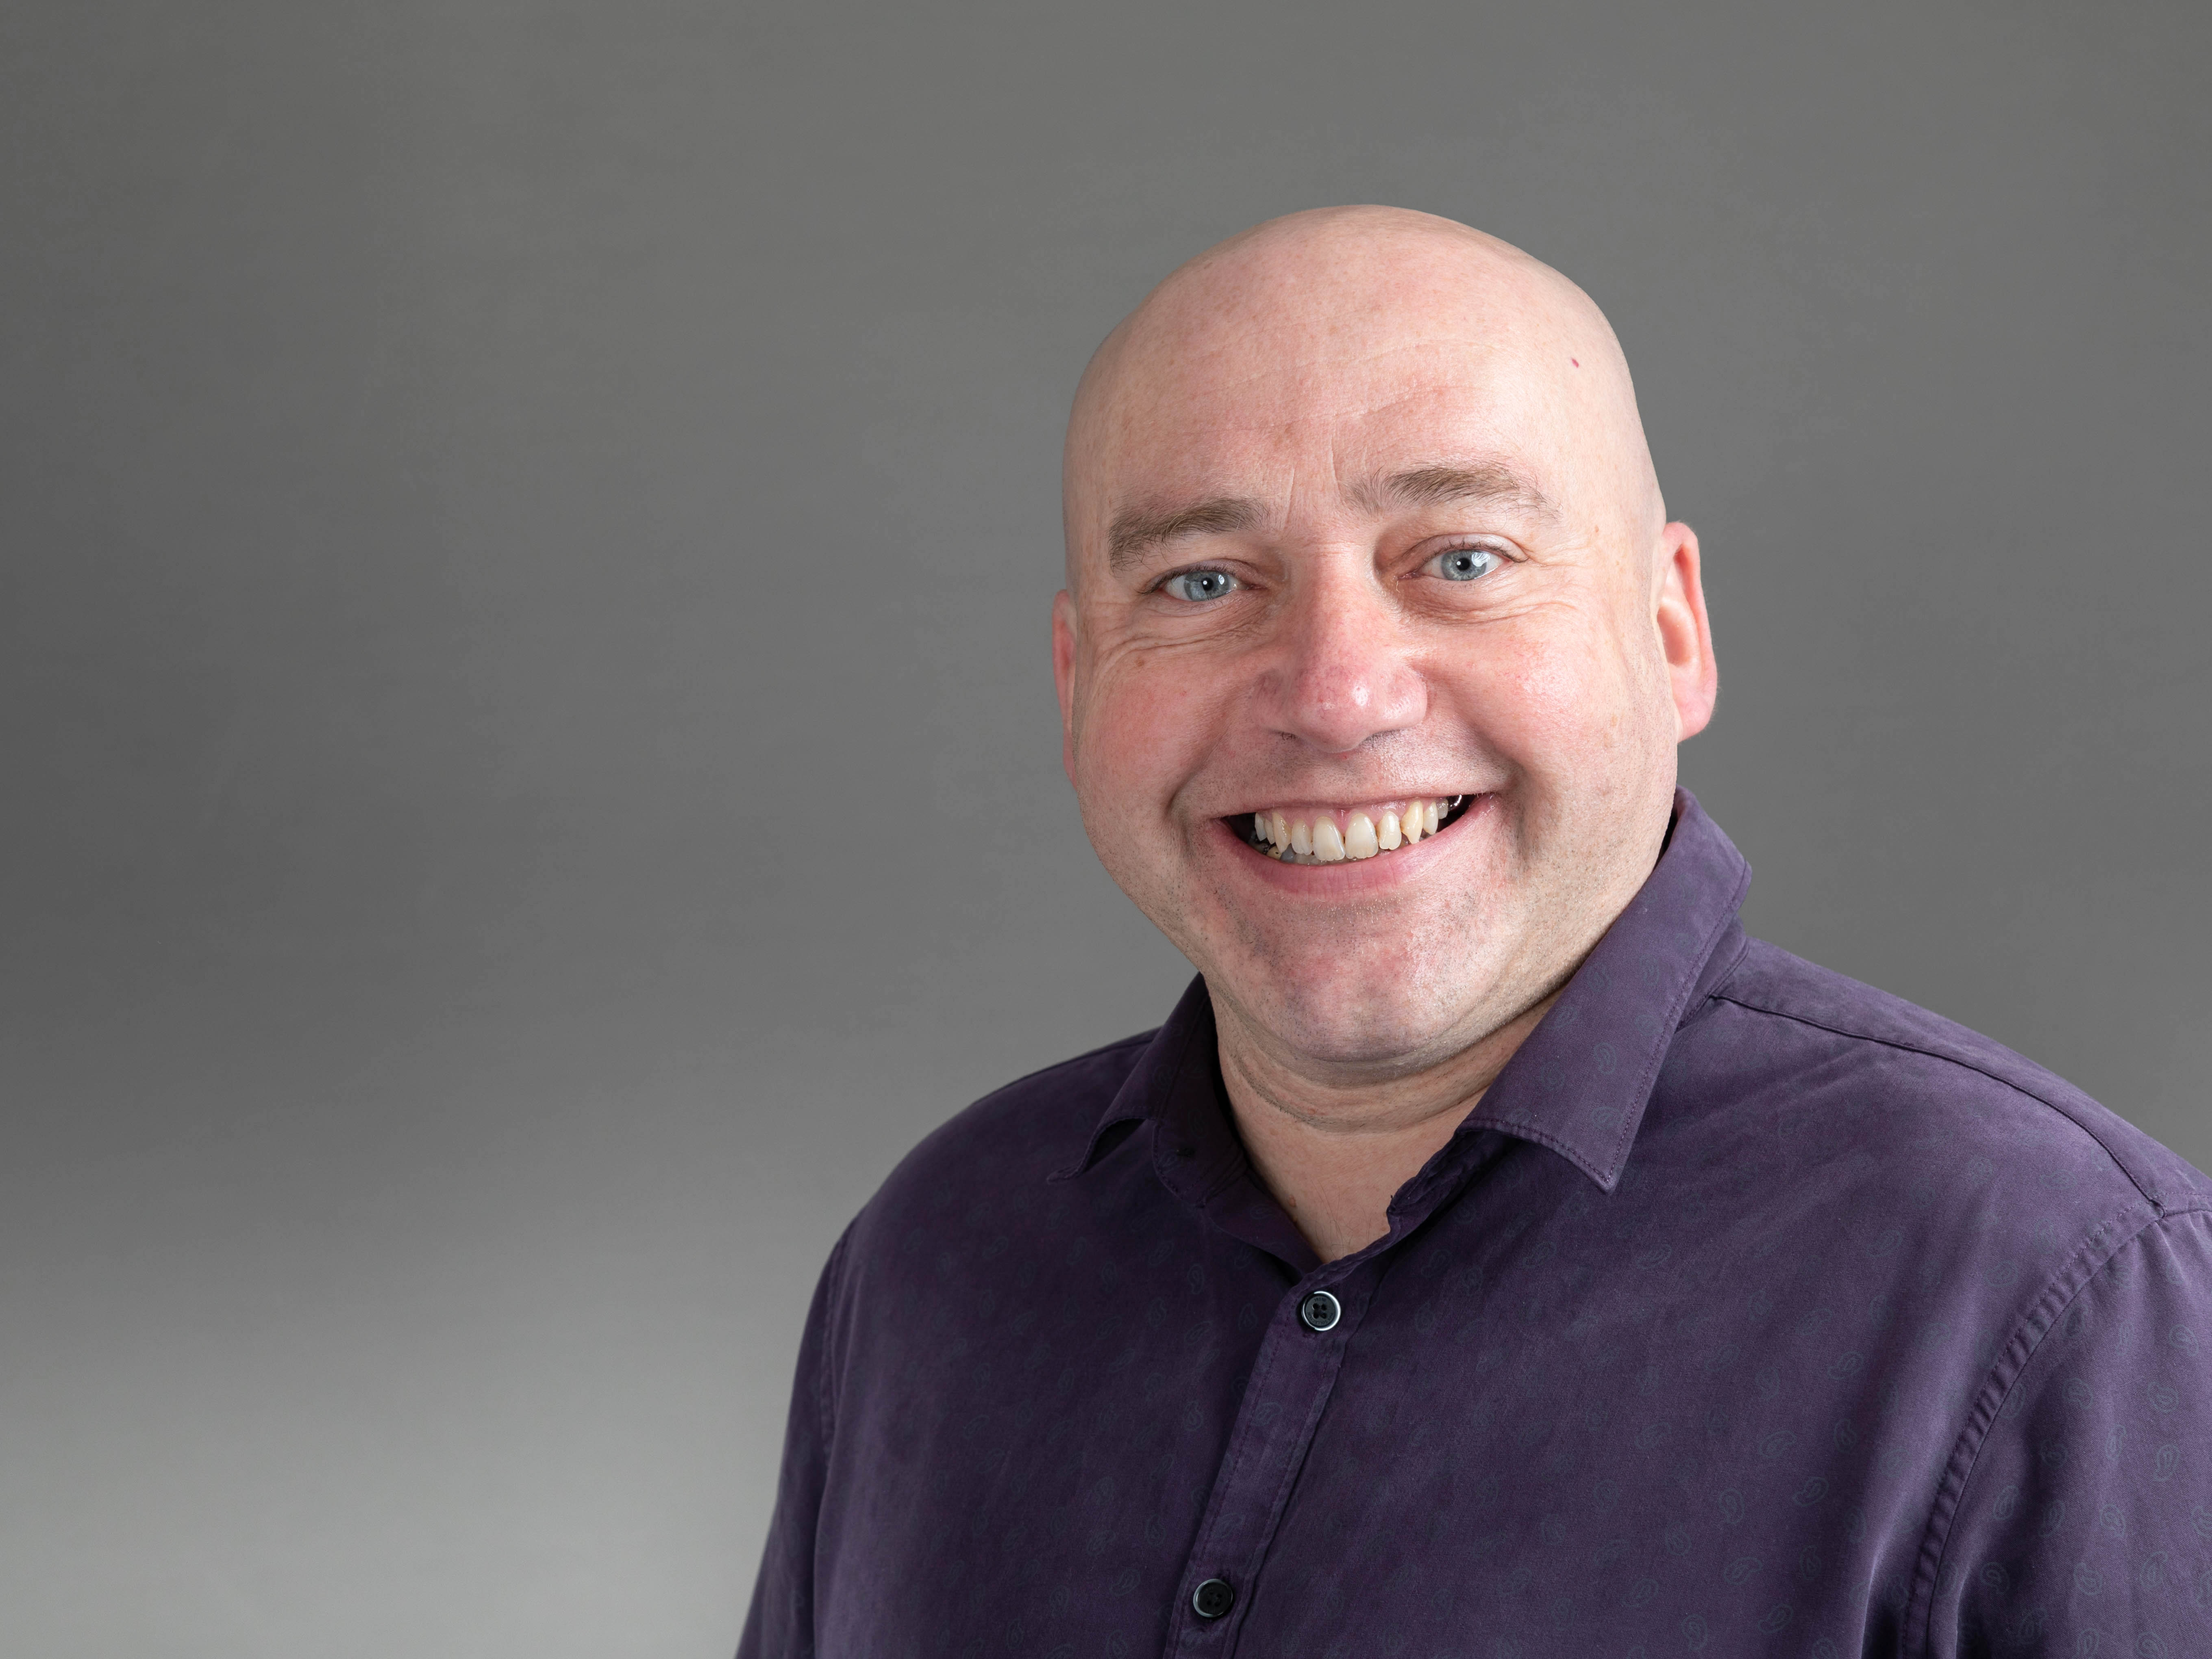 Graham Williams – Sales Force Effectiveness People Development Manager